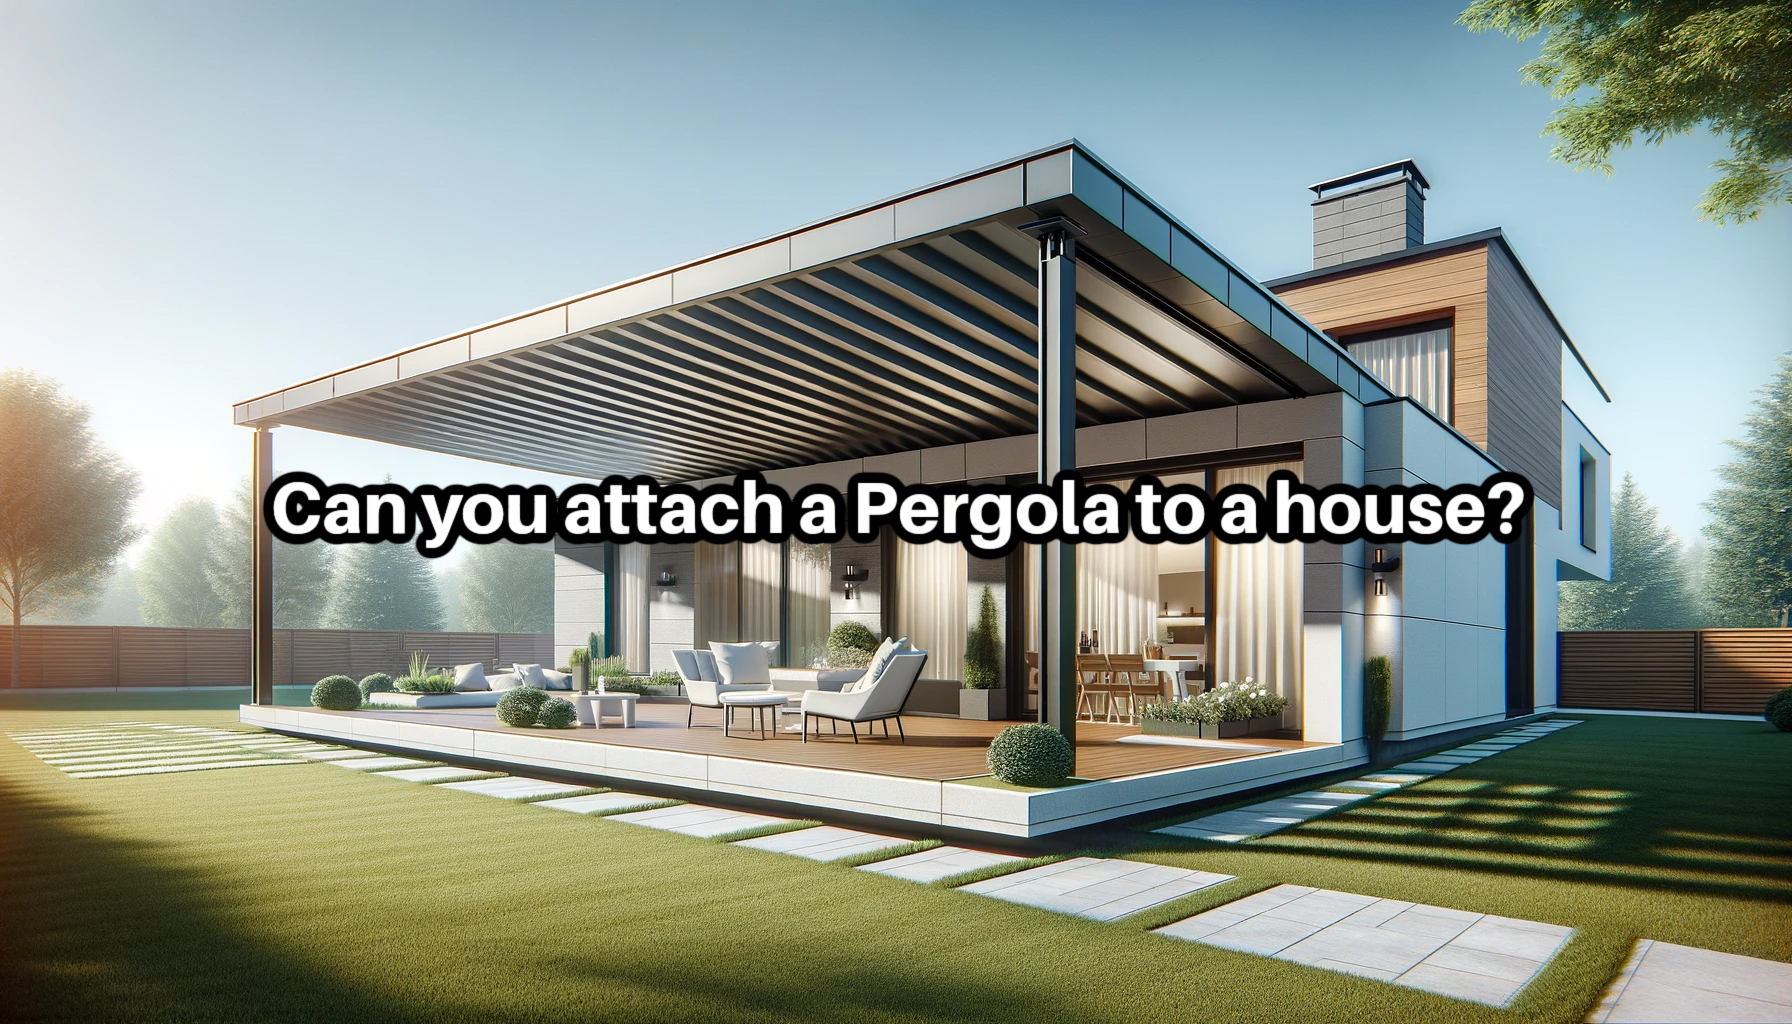 Can you attach a Pergola to a house?